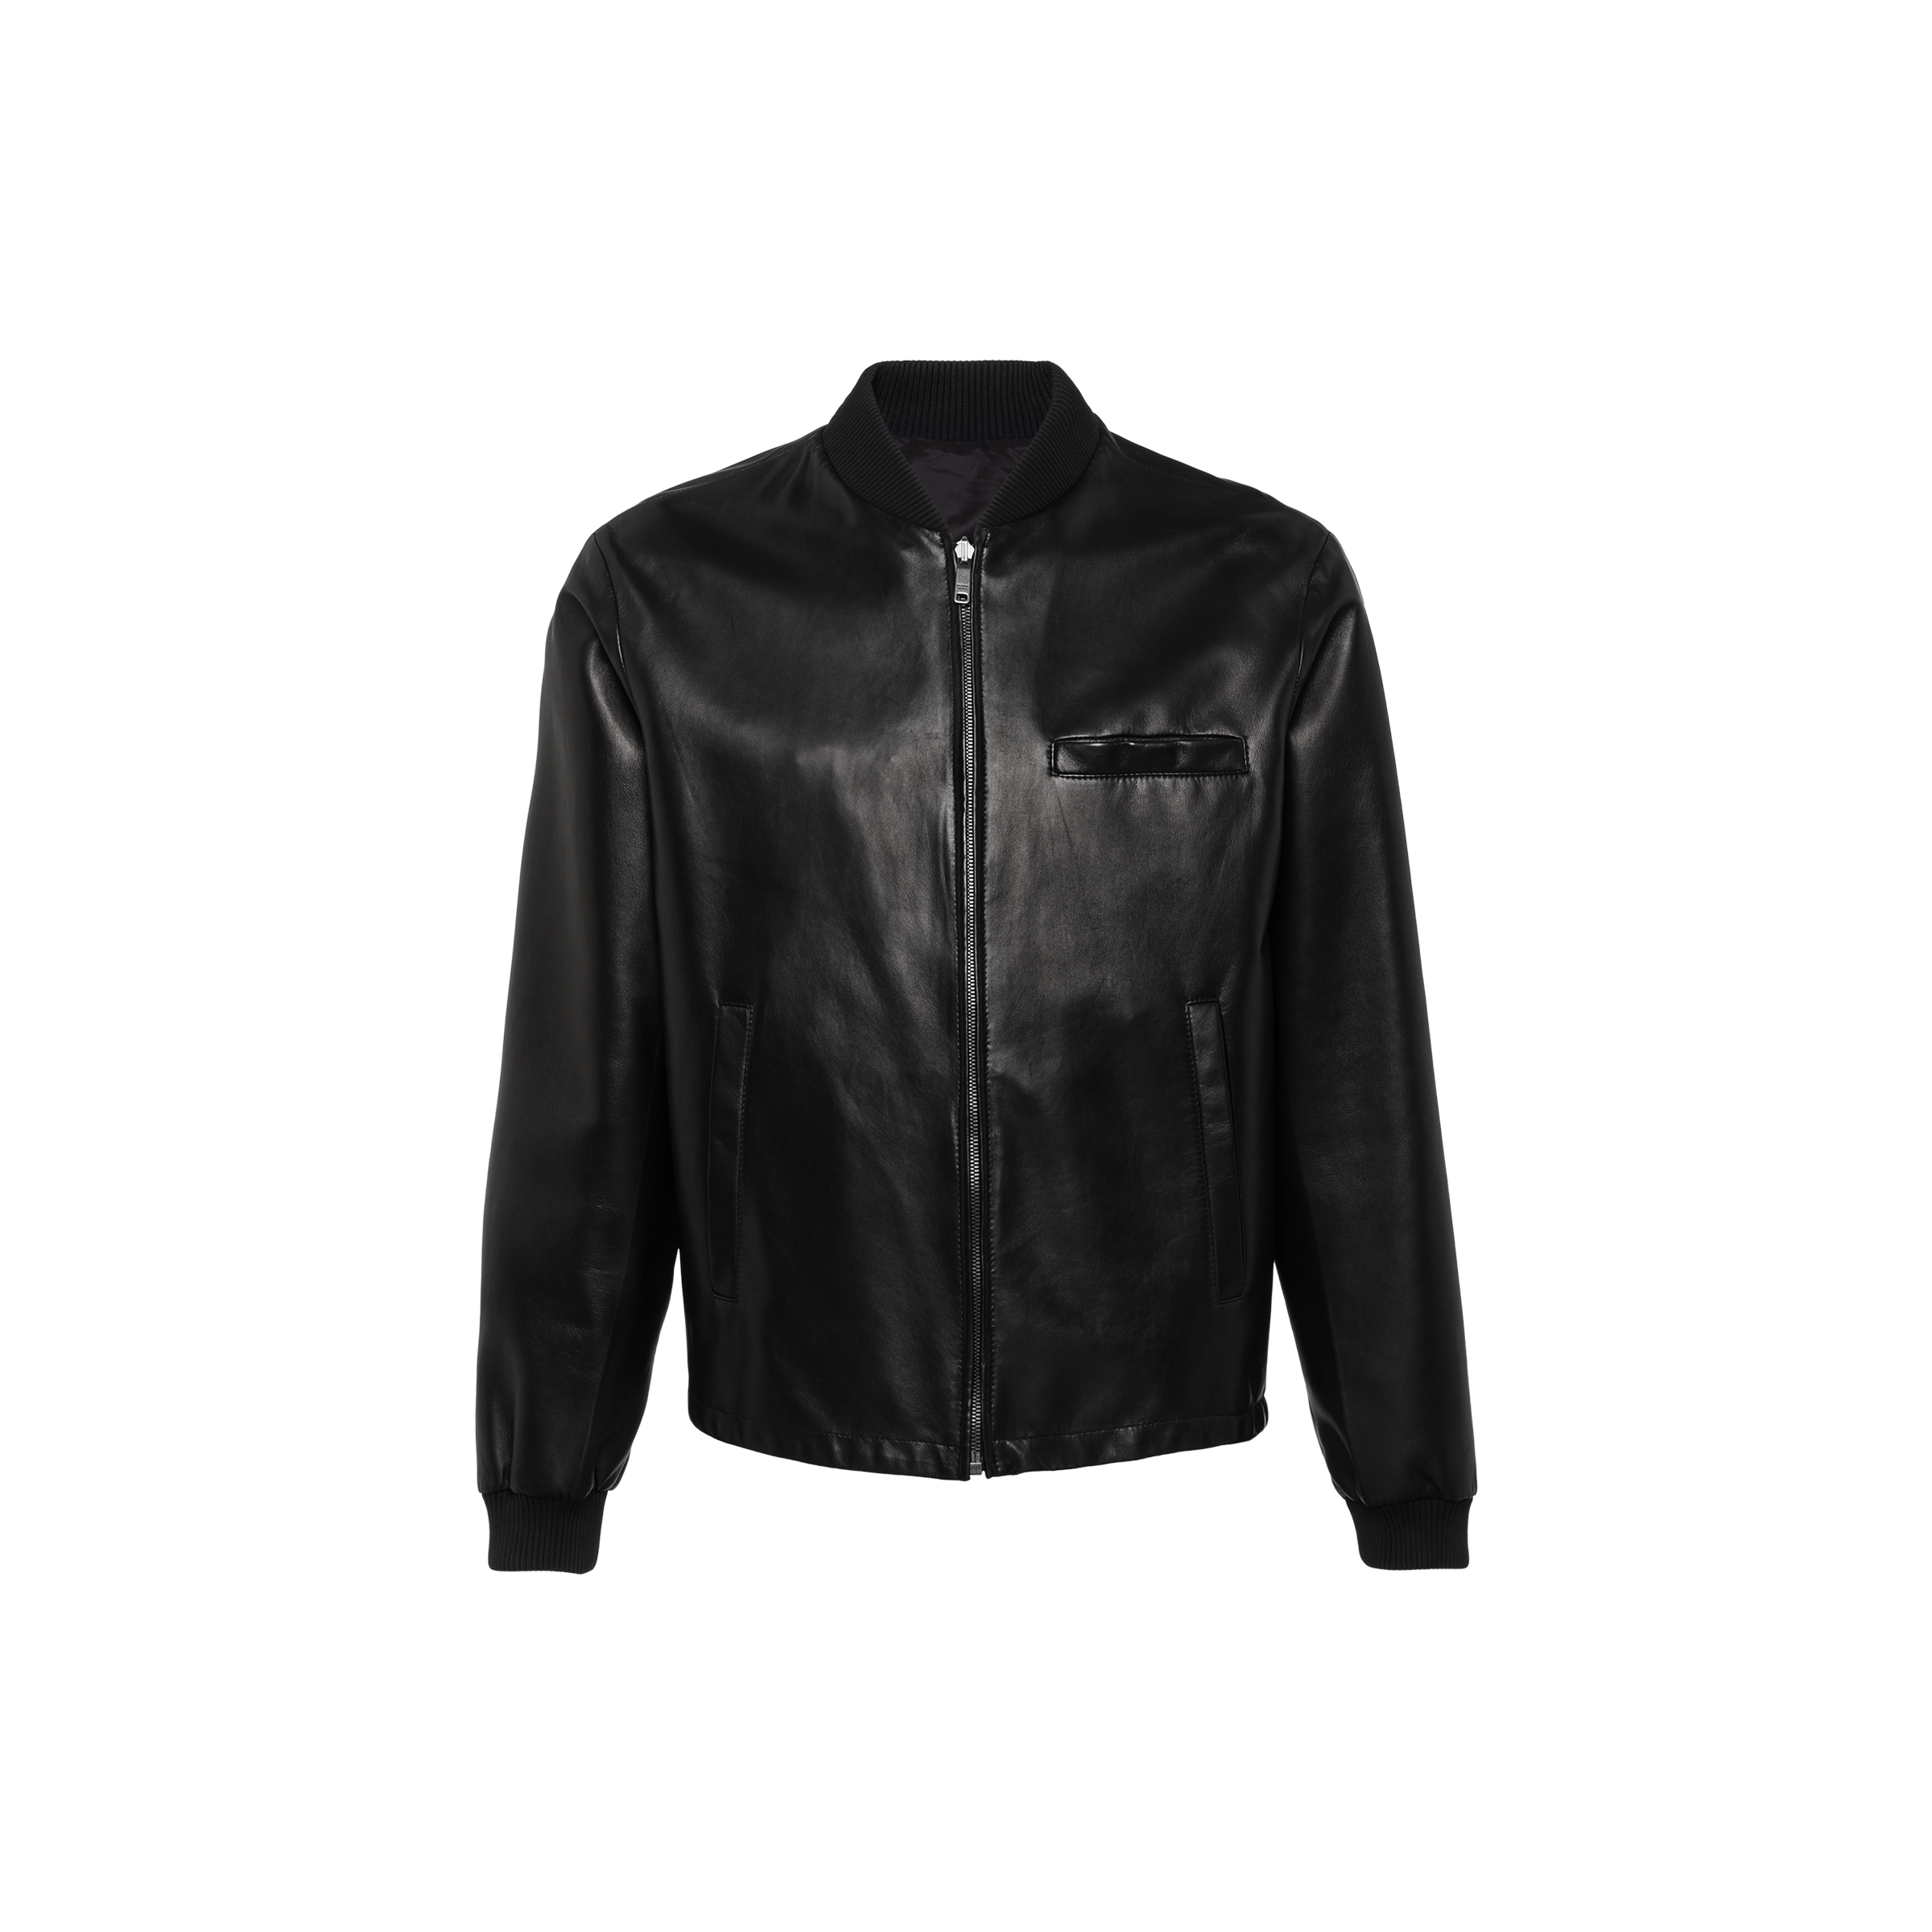 Leather jacket PNG